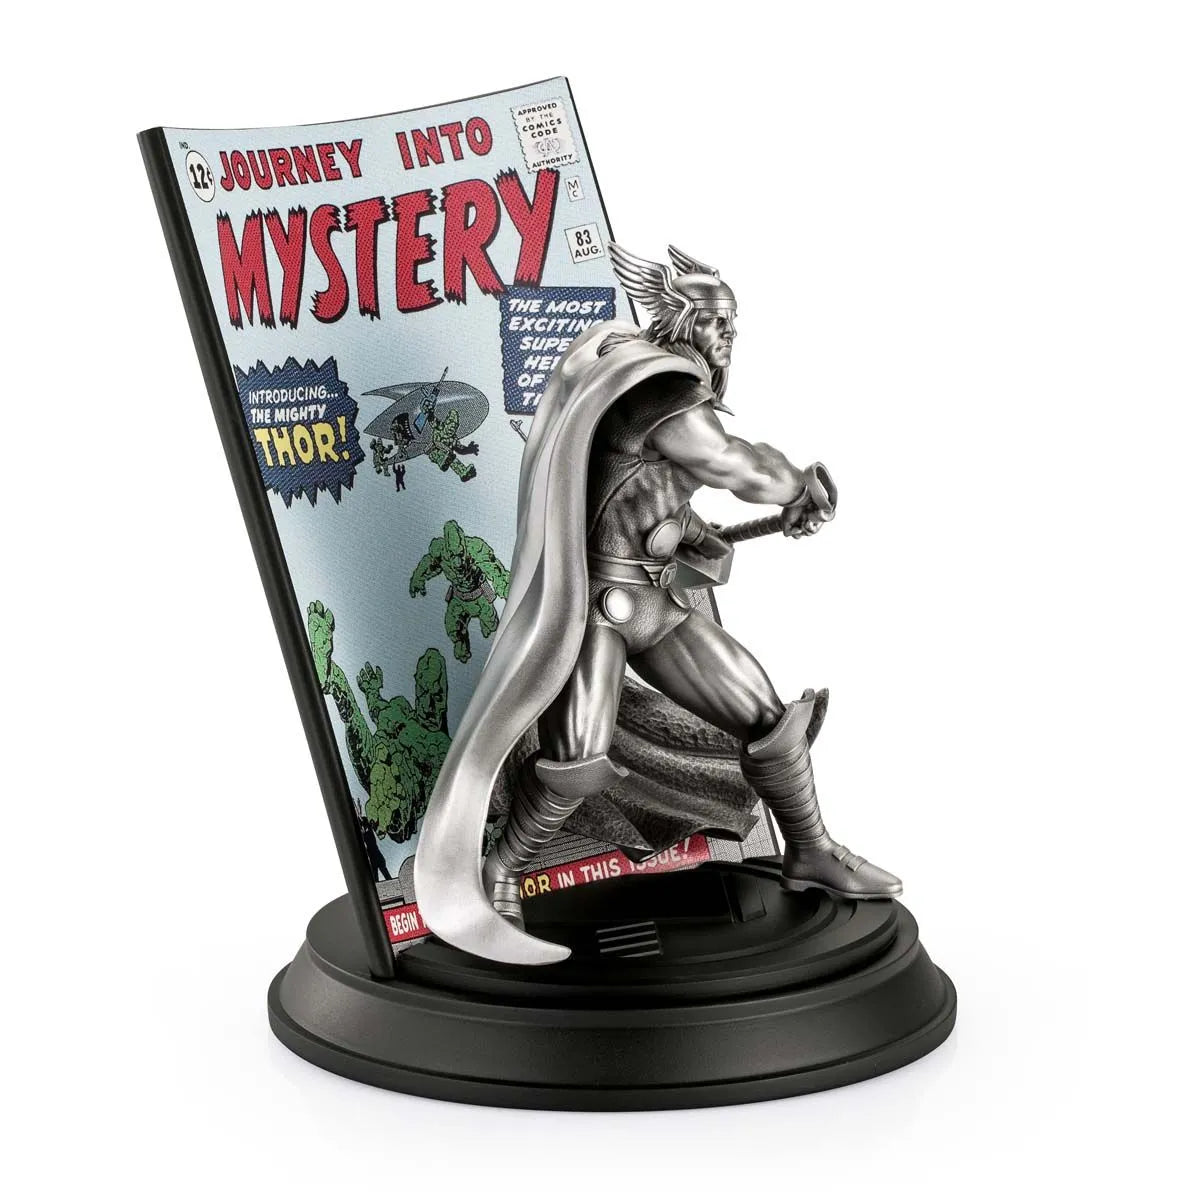 Thor Journey Into Mystery Volume 1 #83 Limited Edition Metal Statue by Royal Selangor -Royal Selangor - India - www.superherotoystore.com